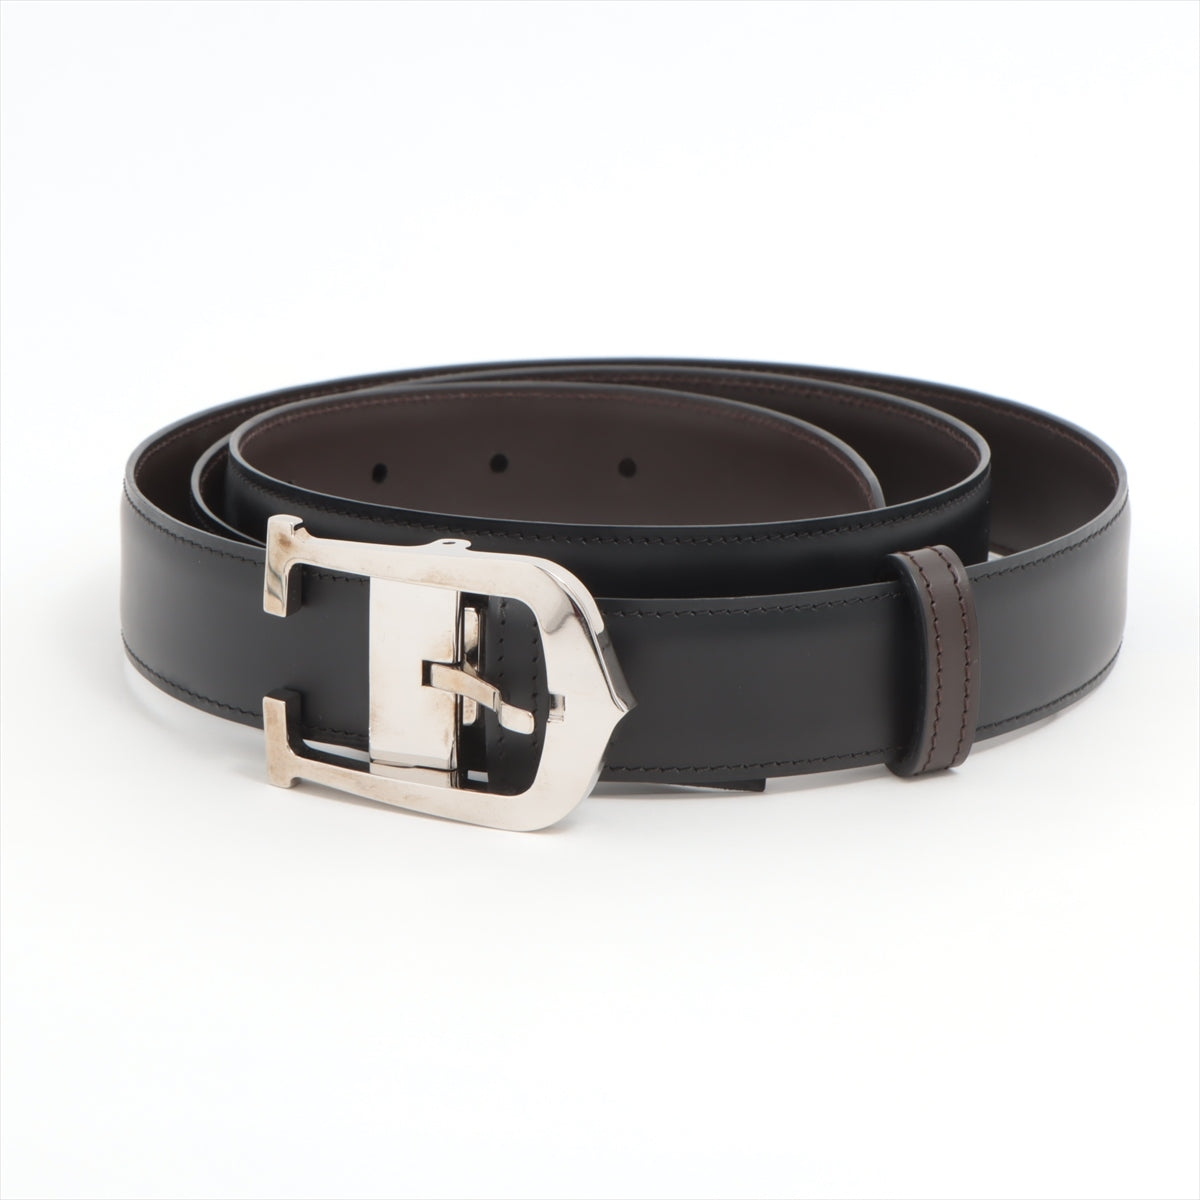 Cartier Allongé Belt No notation GP & leather Black × Brown Wears Losing luster Yes